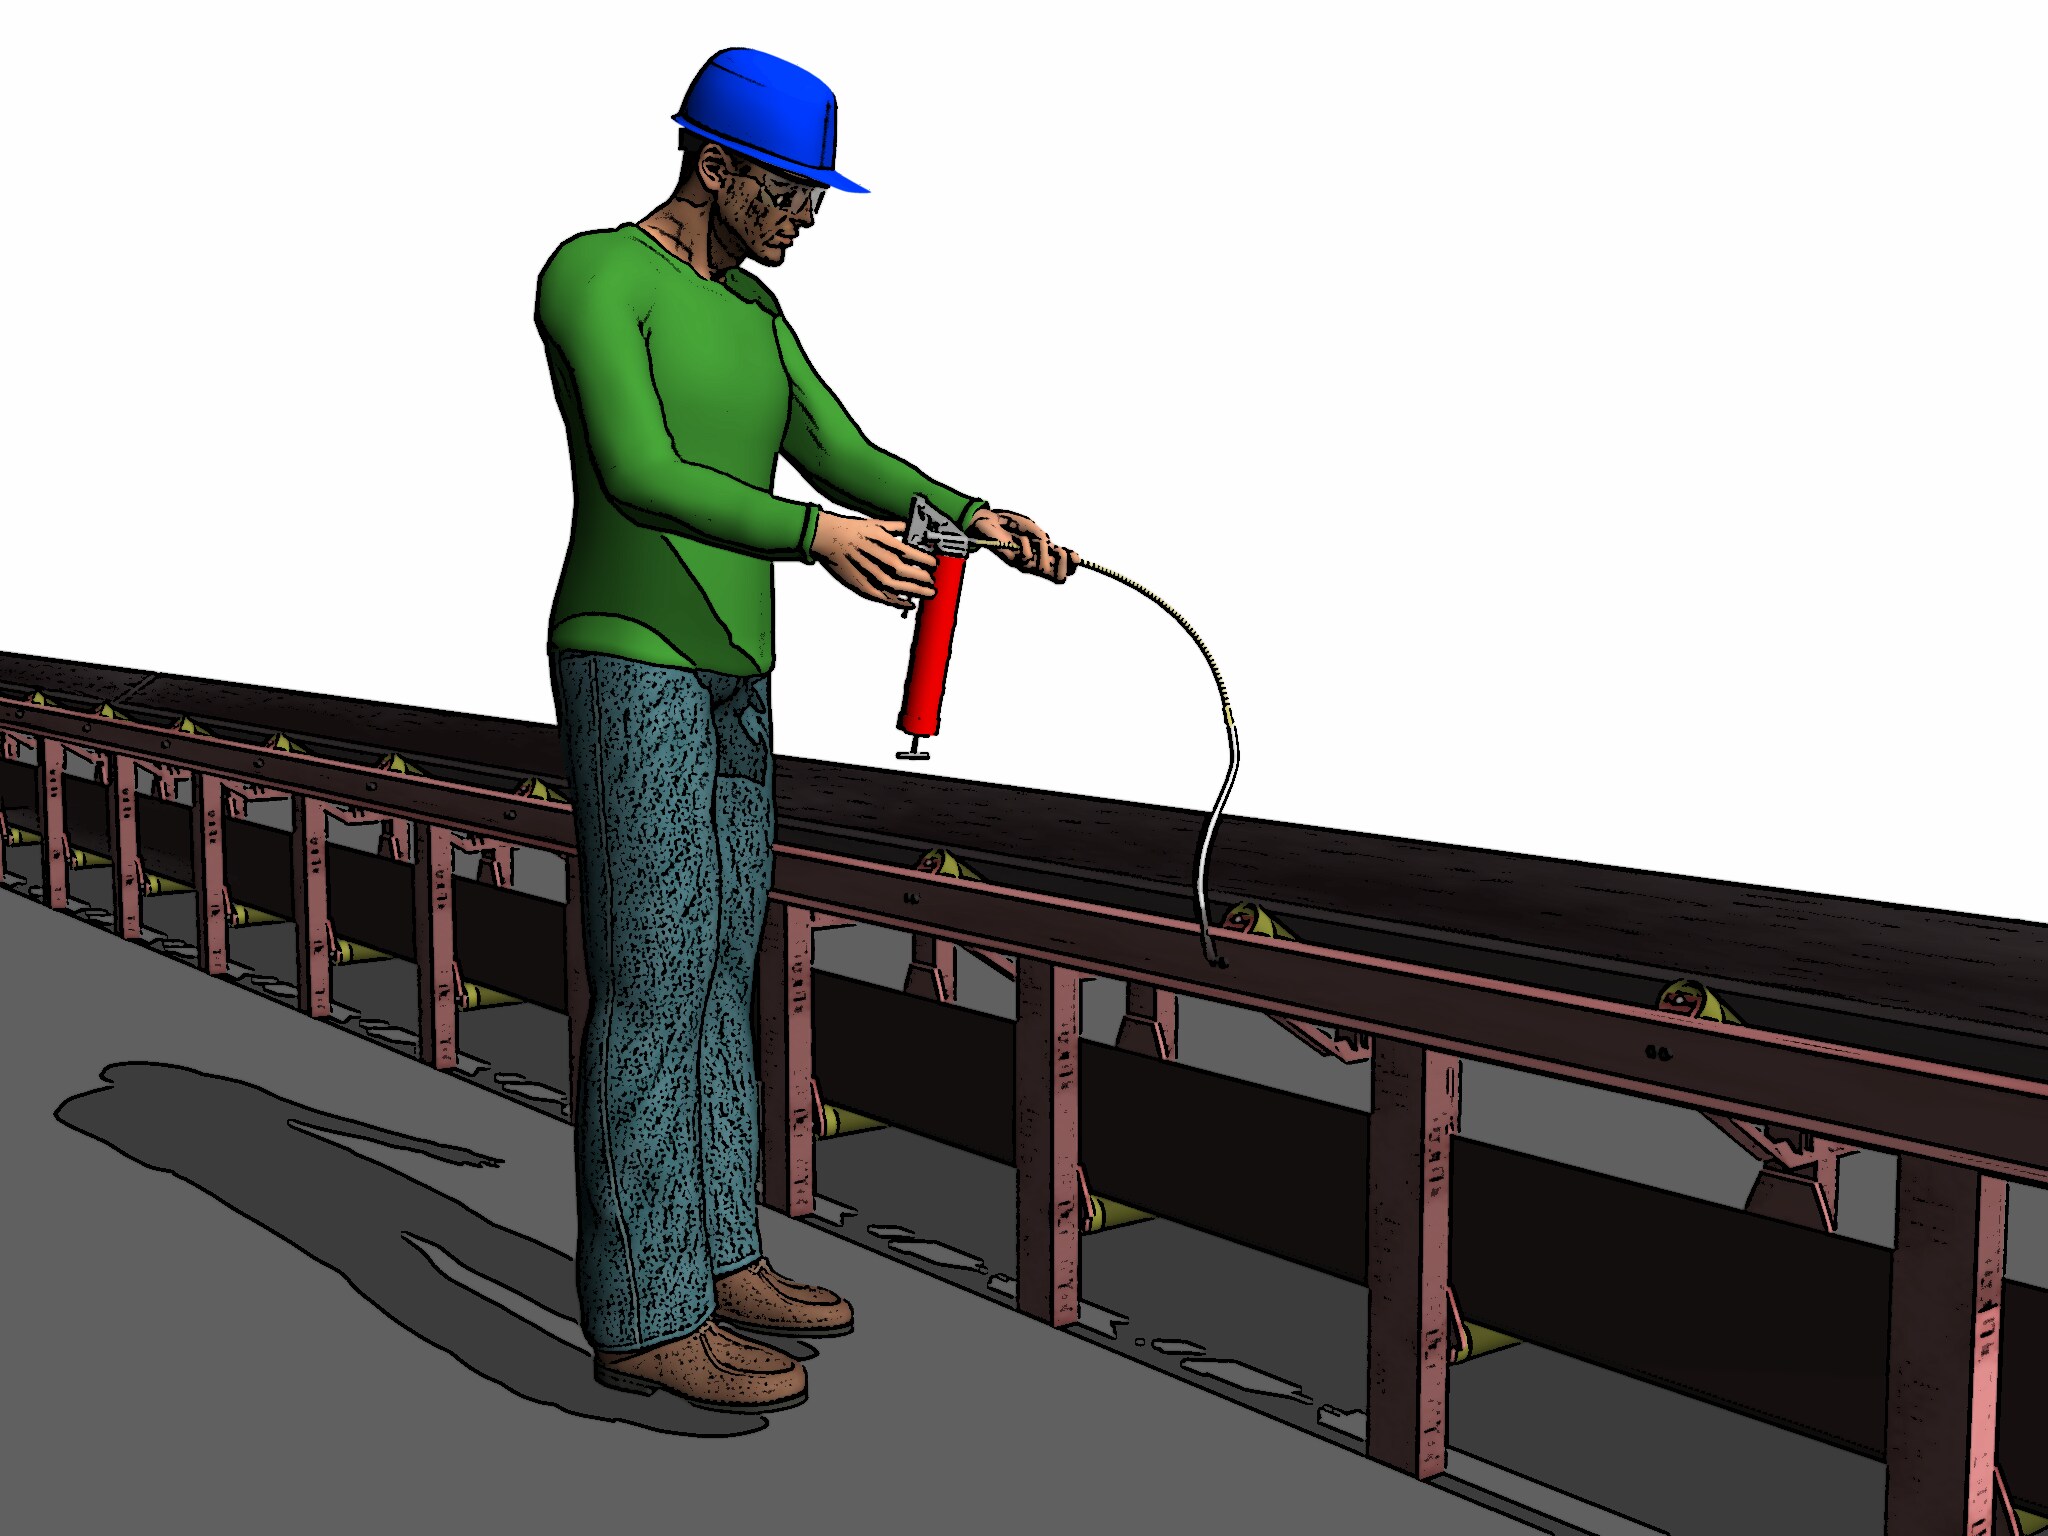 This image shows a worker standing upright while greasing a conveyor belt because an access line was added to the grease gun.